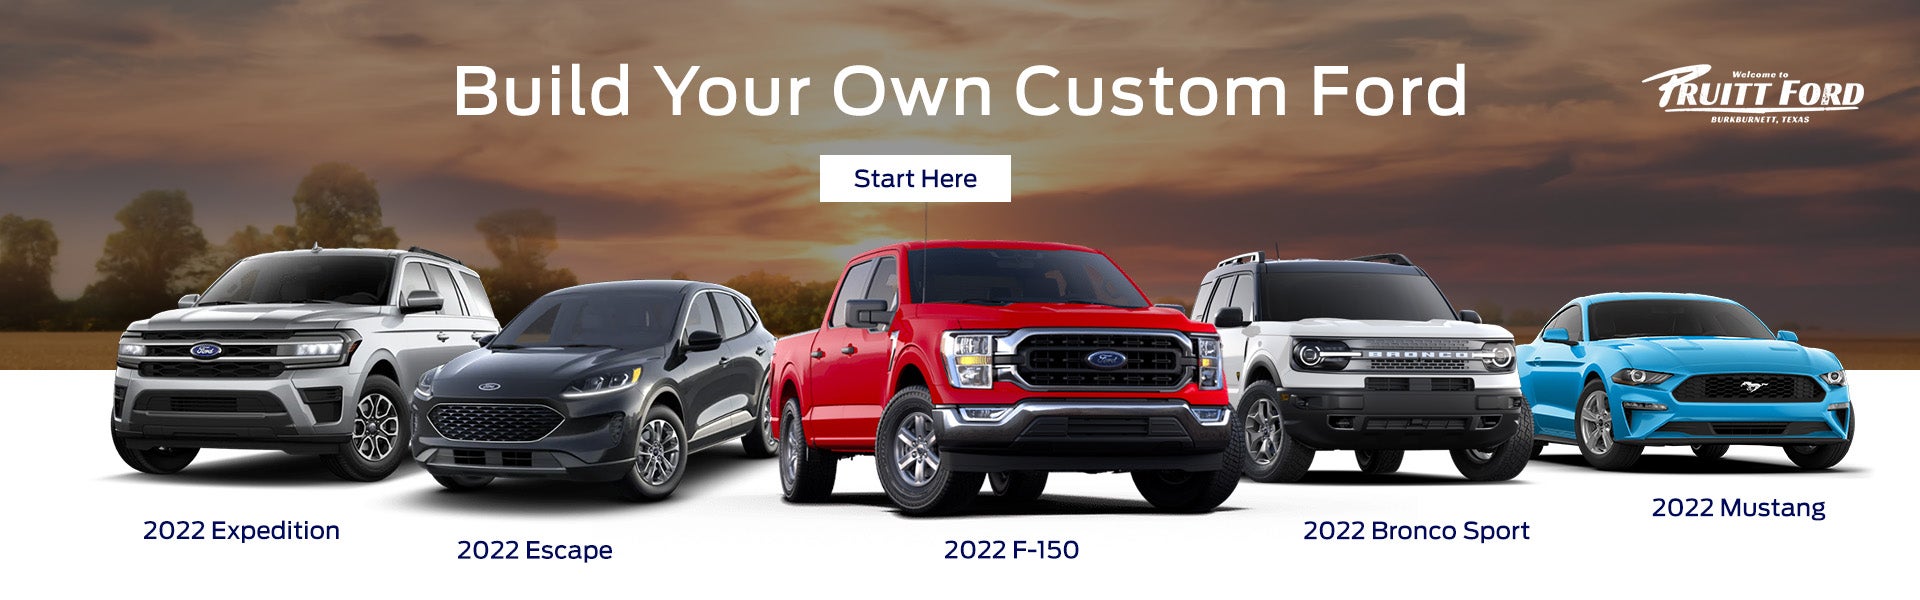 Build Your Own Custom Ford 